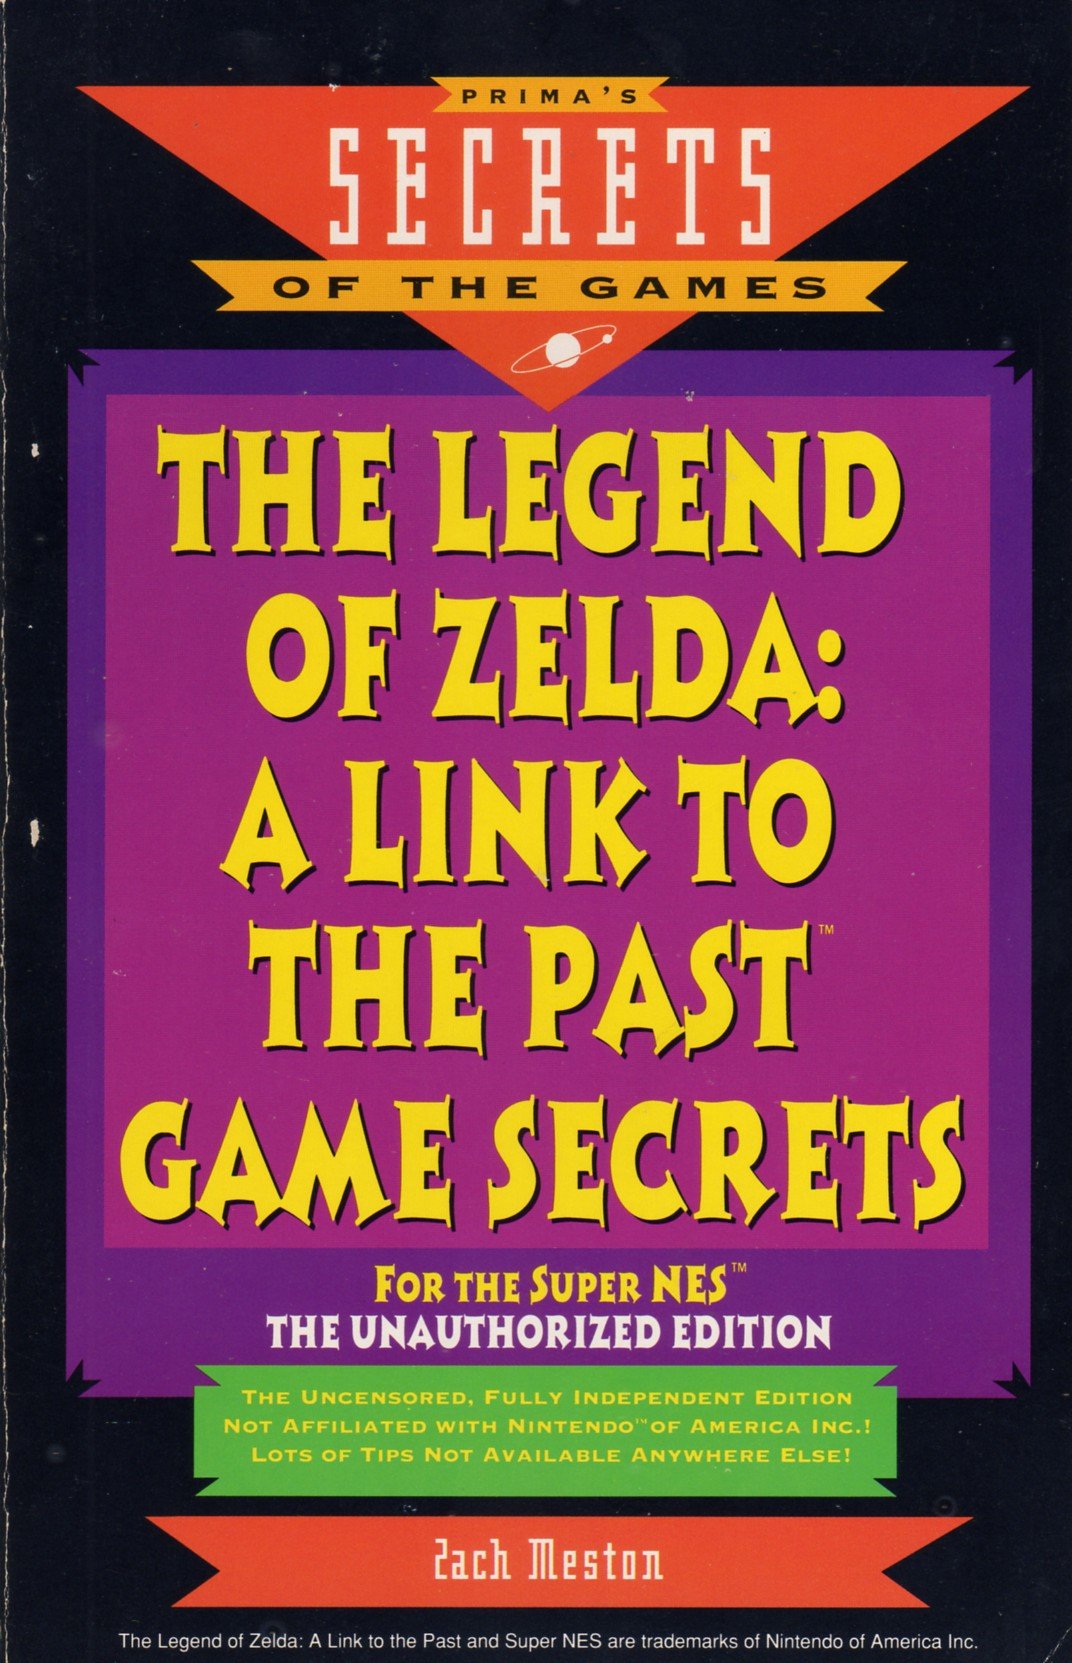 Secrets - The Legend of Zelda: A Link to the Past Guide - IGN